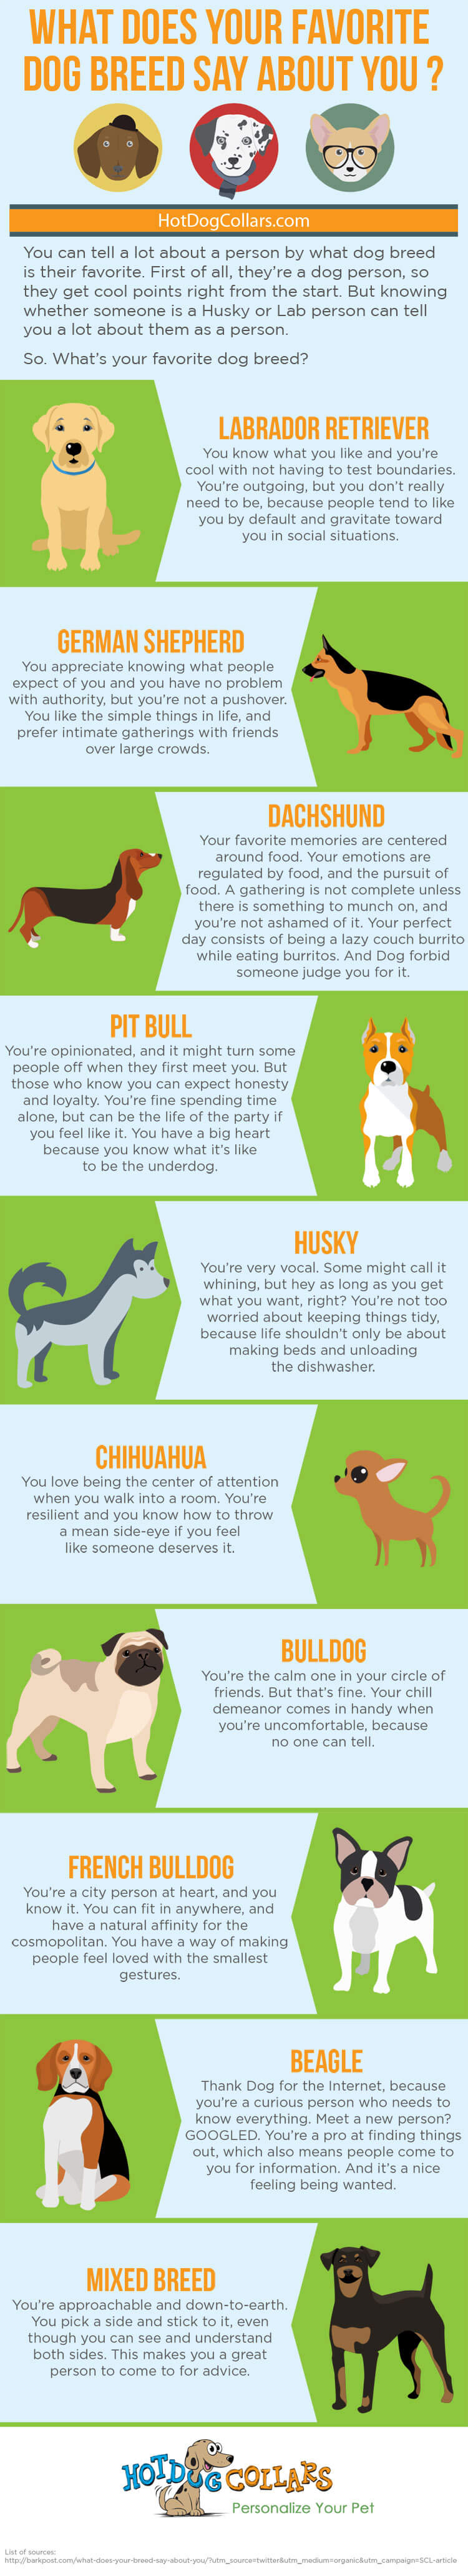 What Does Your Favorite Dog Breed Say About You [INFOGRAPHIC] -  